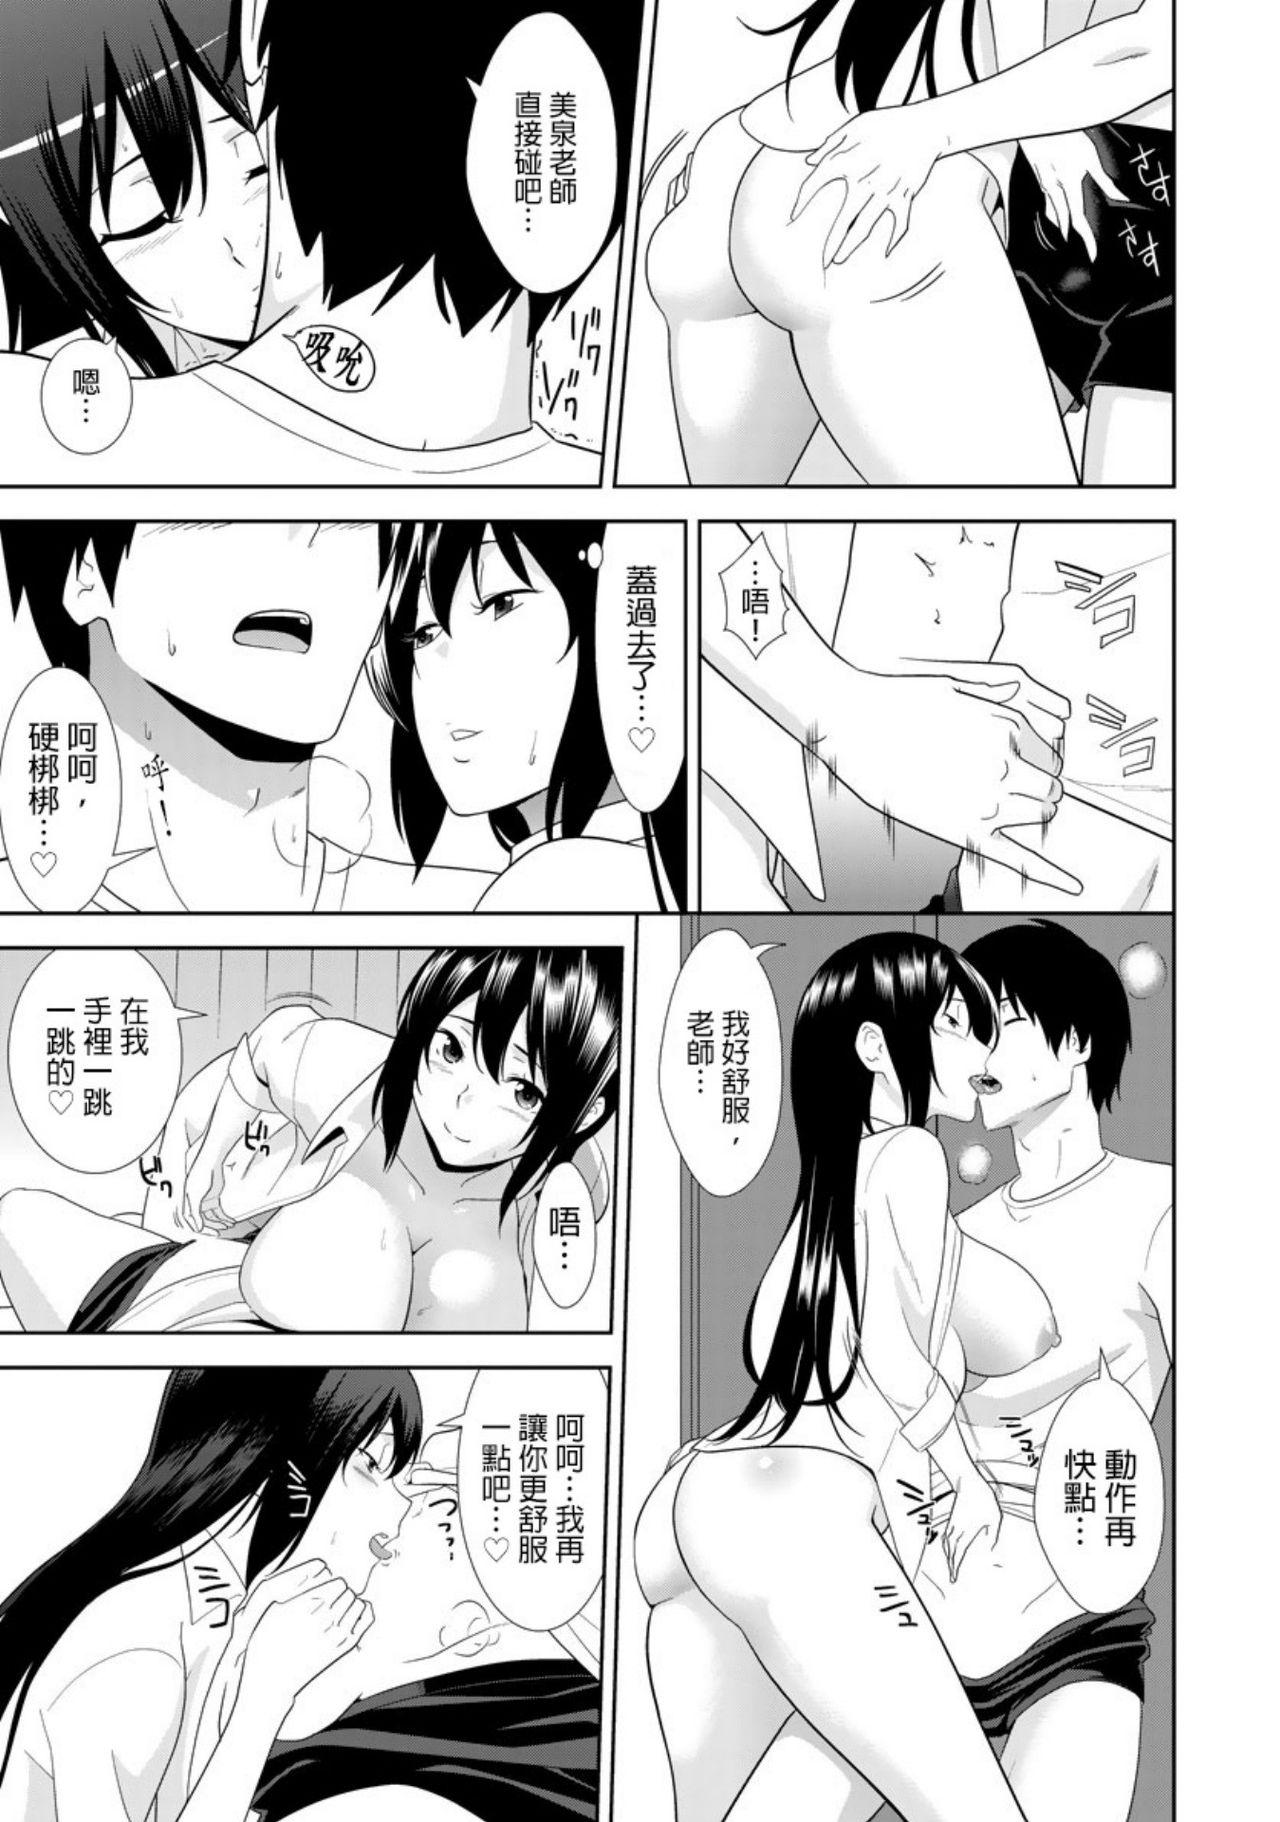 Escort 教え子に襲ワレル人妻は抵抗できなくて Ch.7 First - Page 4